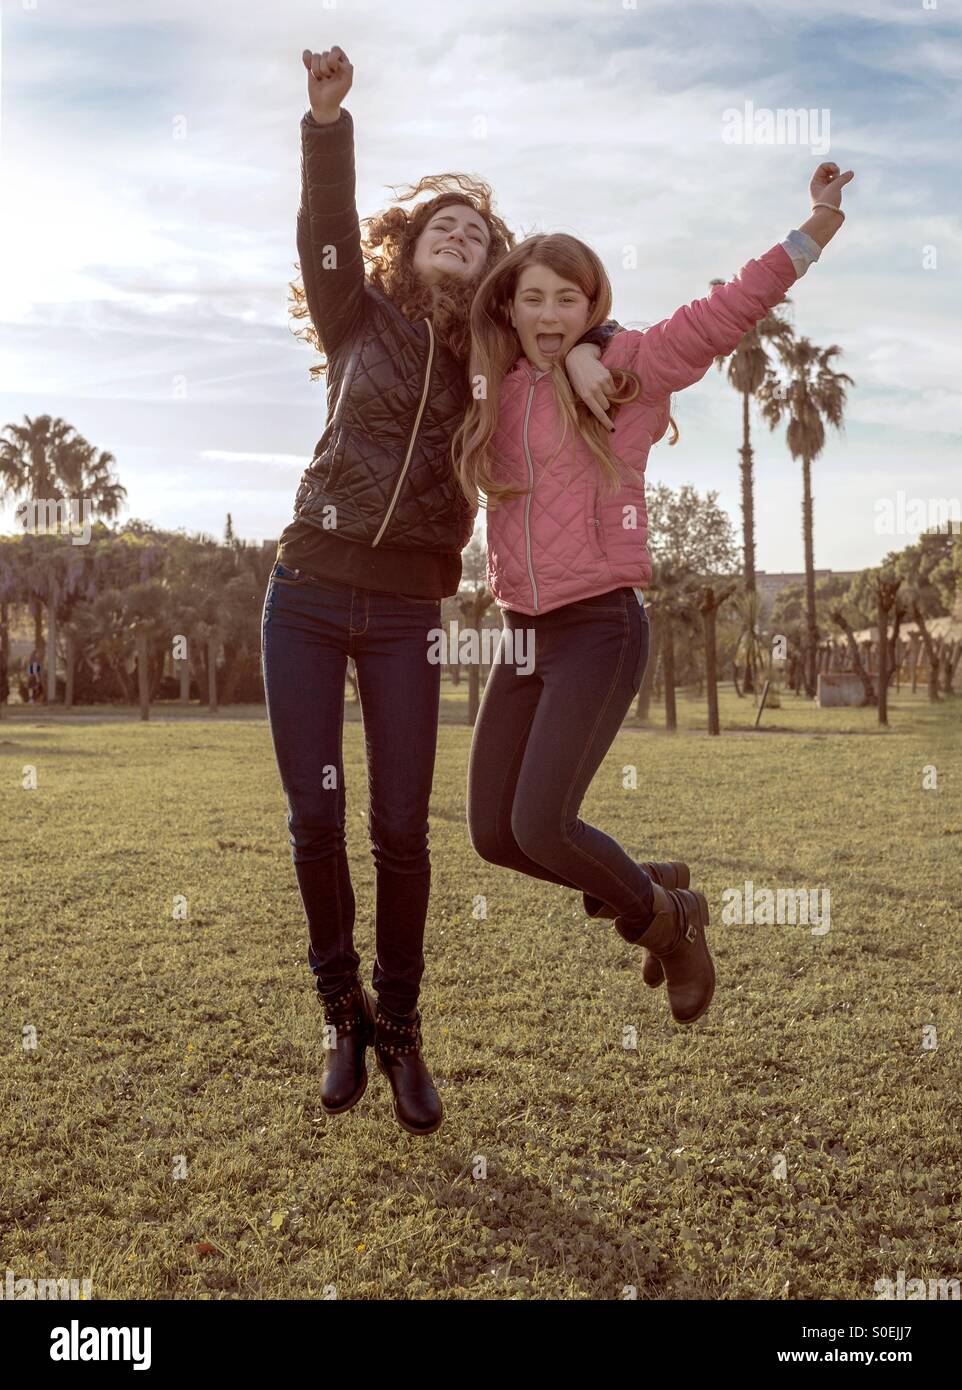 Two girls jumping Stock Photo